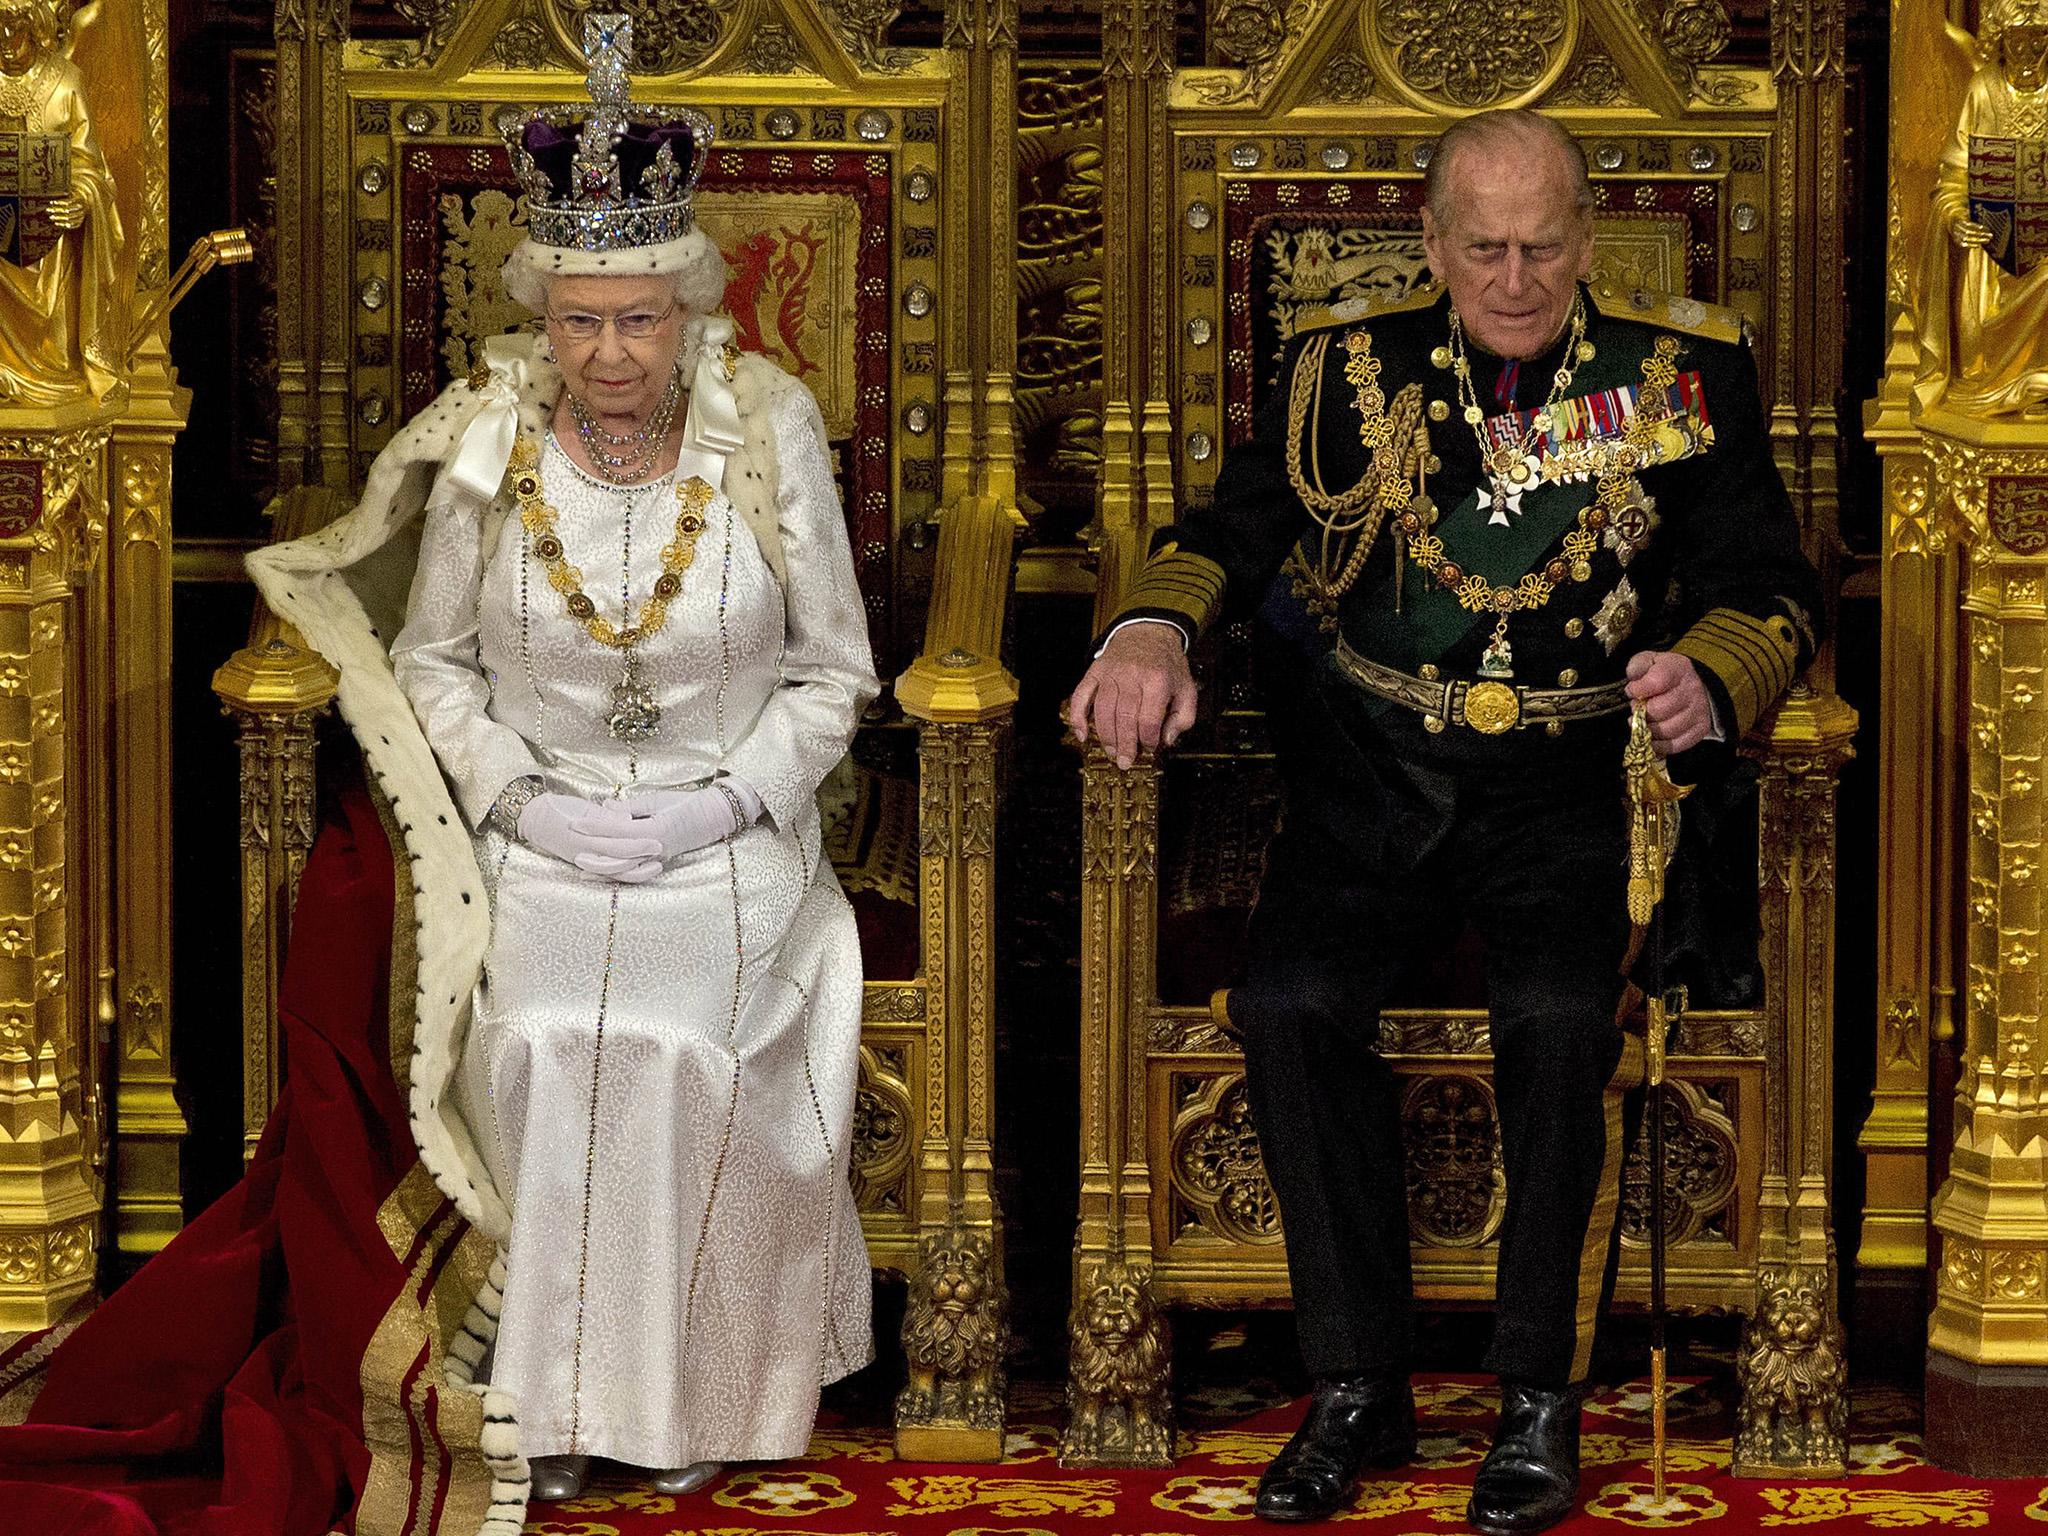 The Queen has been married to the Duke of Edinburgh for nearly 70 years